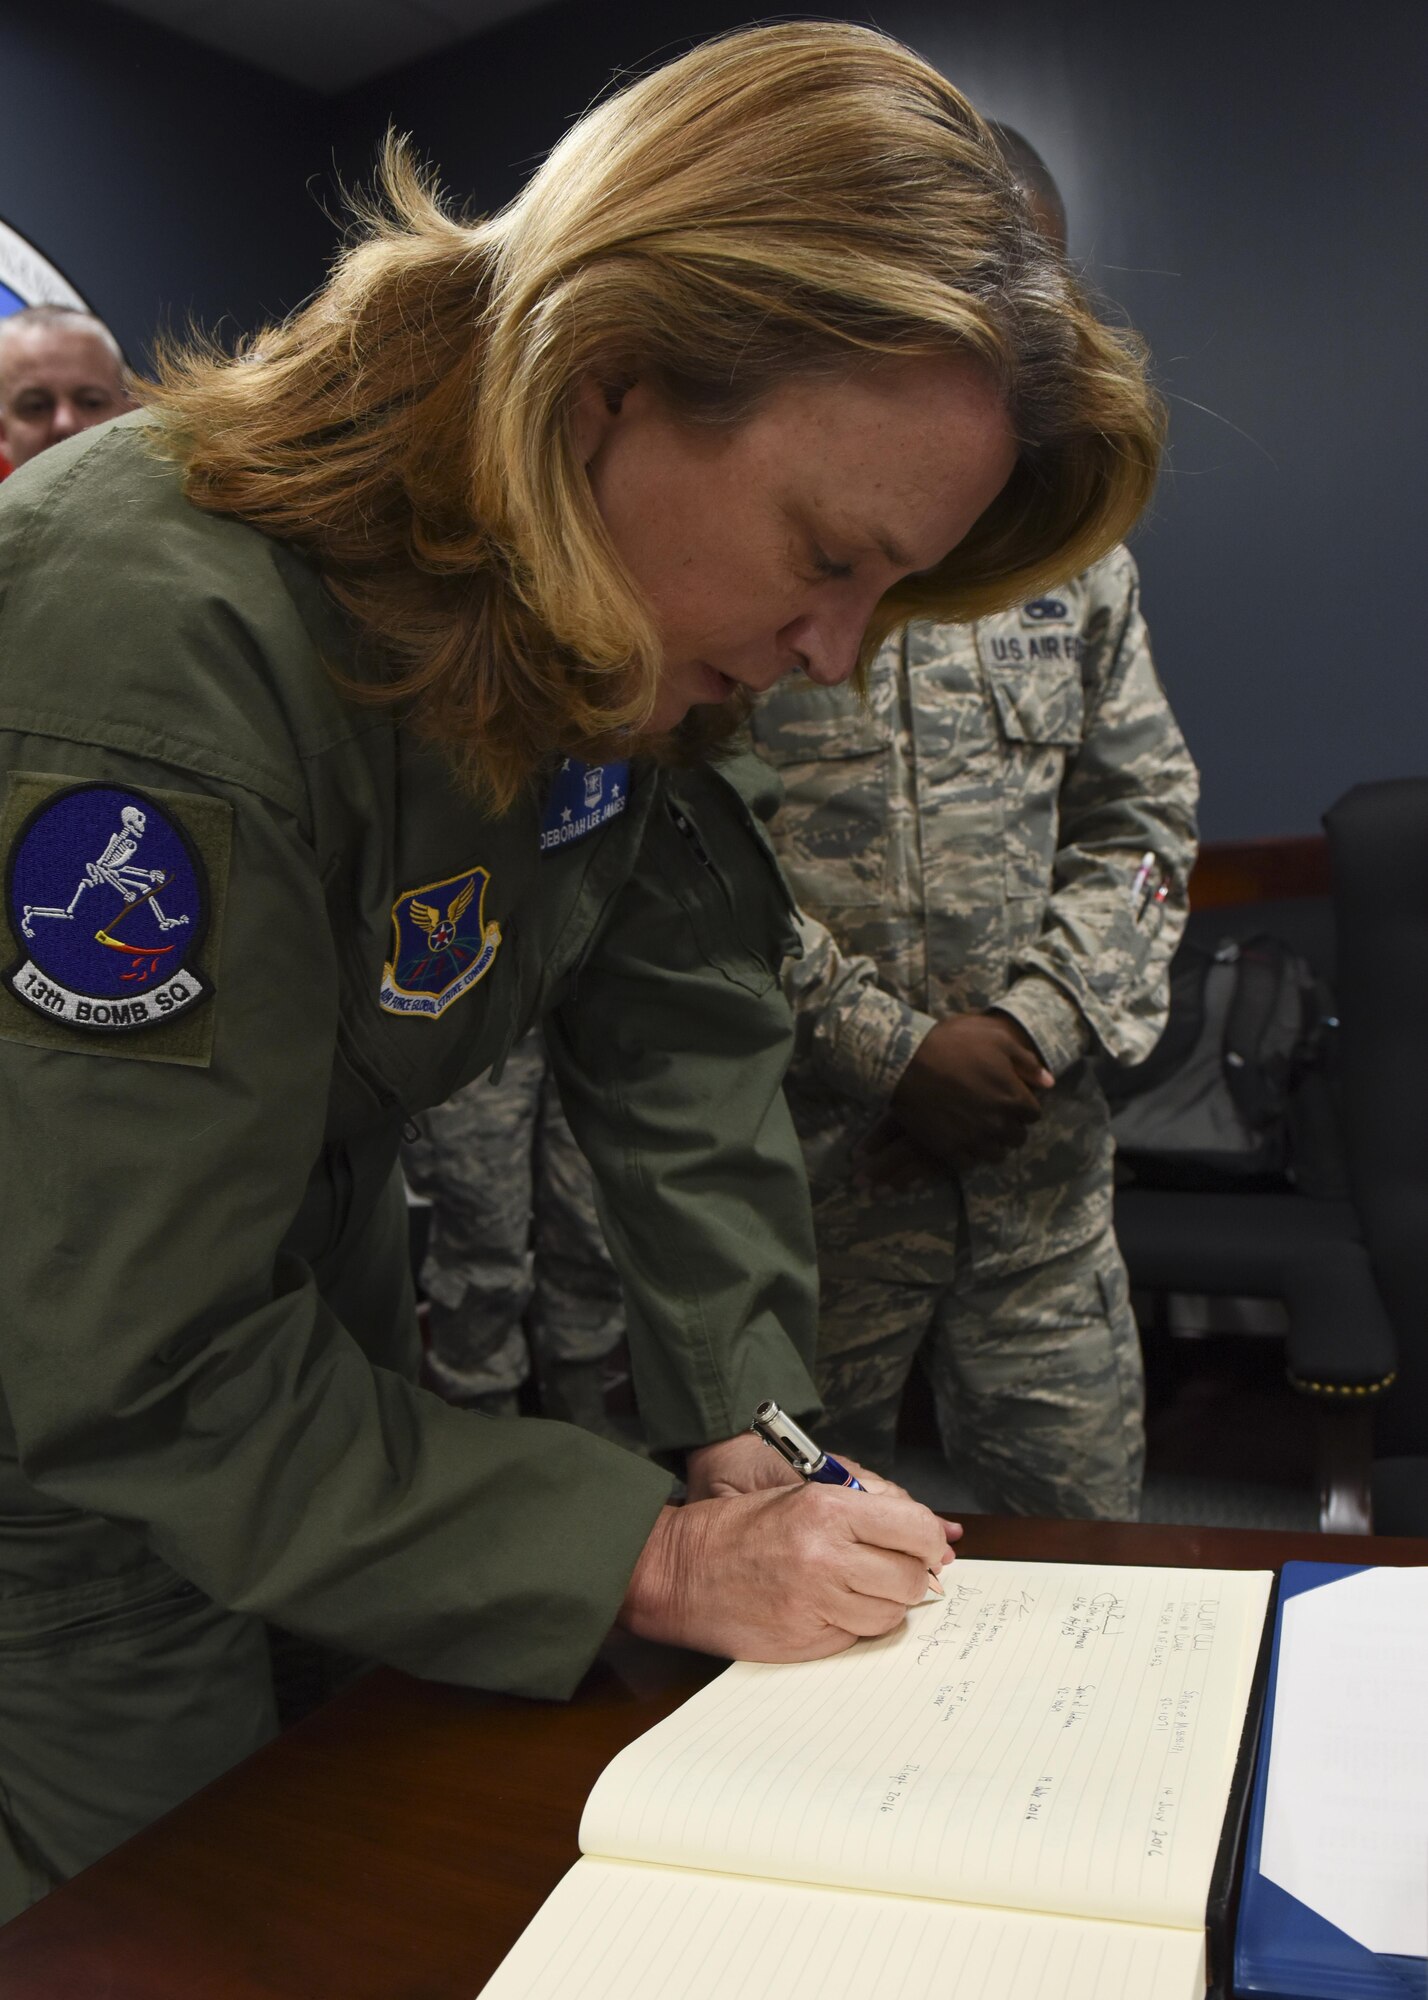 Secretary of the Air Force Deborah Lee James signs a B-2 Spirit log following her flight in a B-2 stealth bomber at Whiteman Air Force Base, Mo., Nov. 8, 2016. James had the opportunity to fly in a stealth bomber during her visit to Whiteman and see first-hand Whiteman’s strategic mission.  (U.S. Air Force photo by Senior Airman Danielle Quilla)